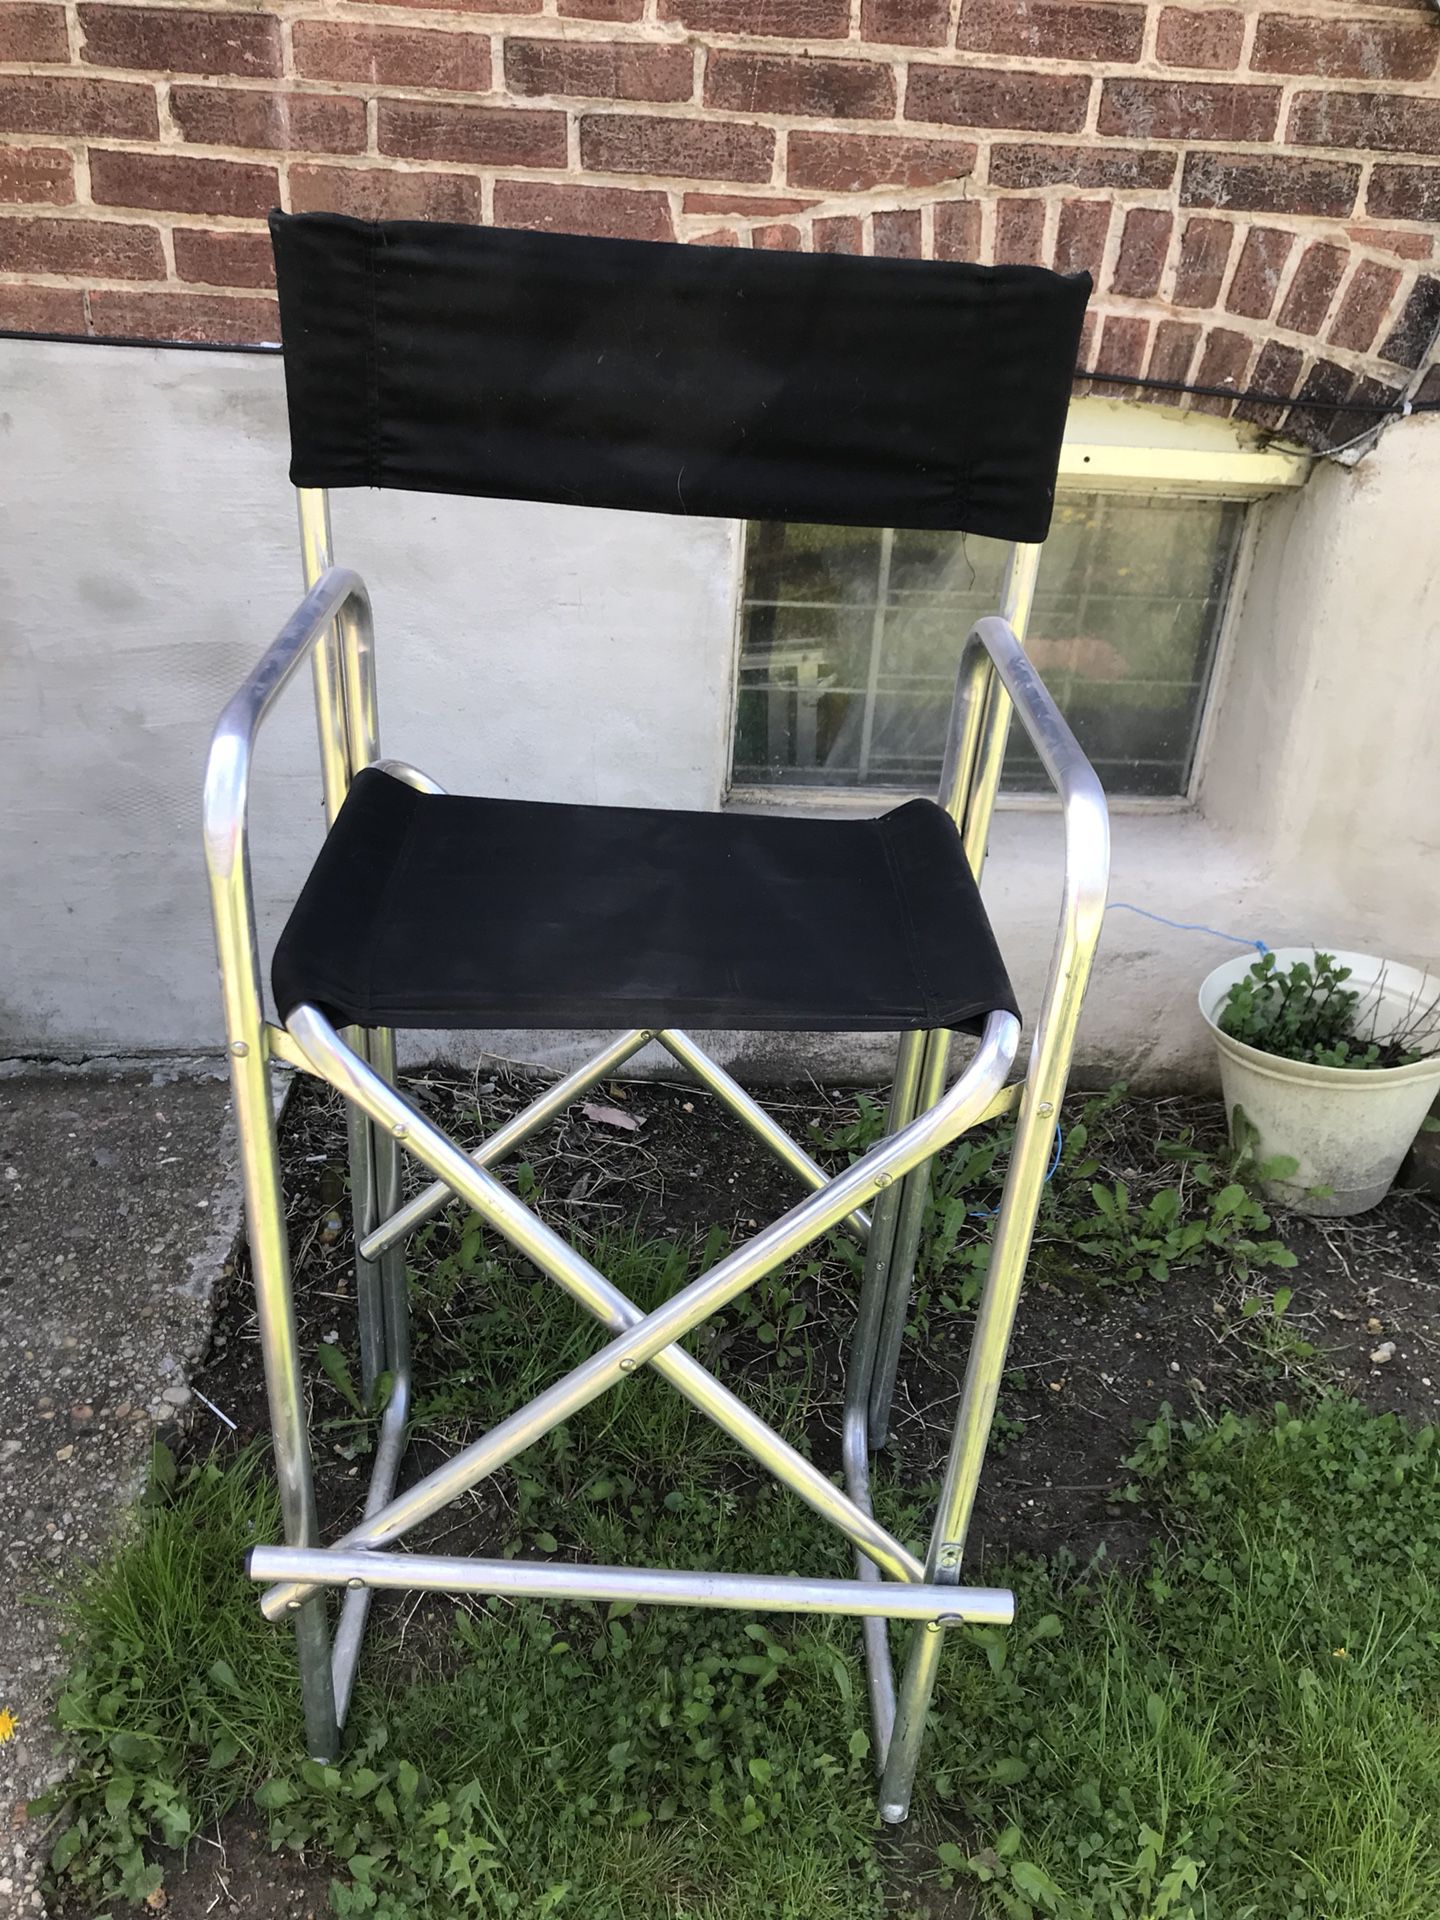 Aluminum high director chair great for selling at events